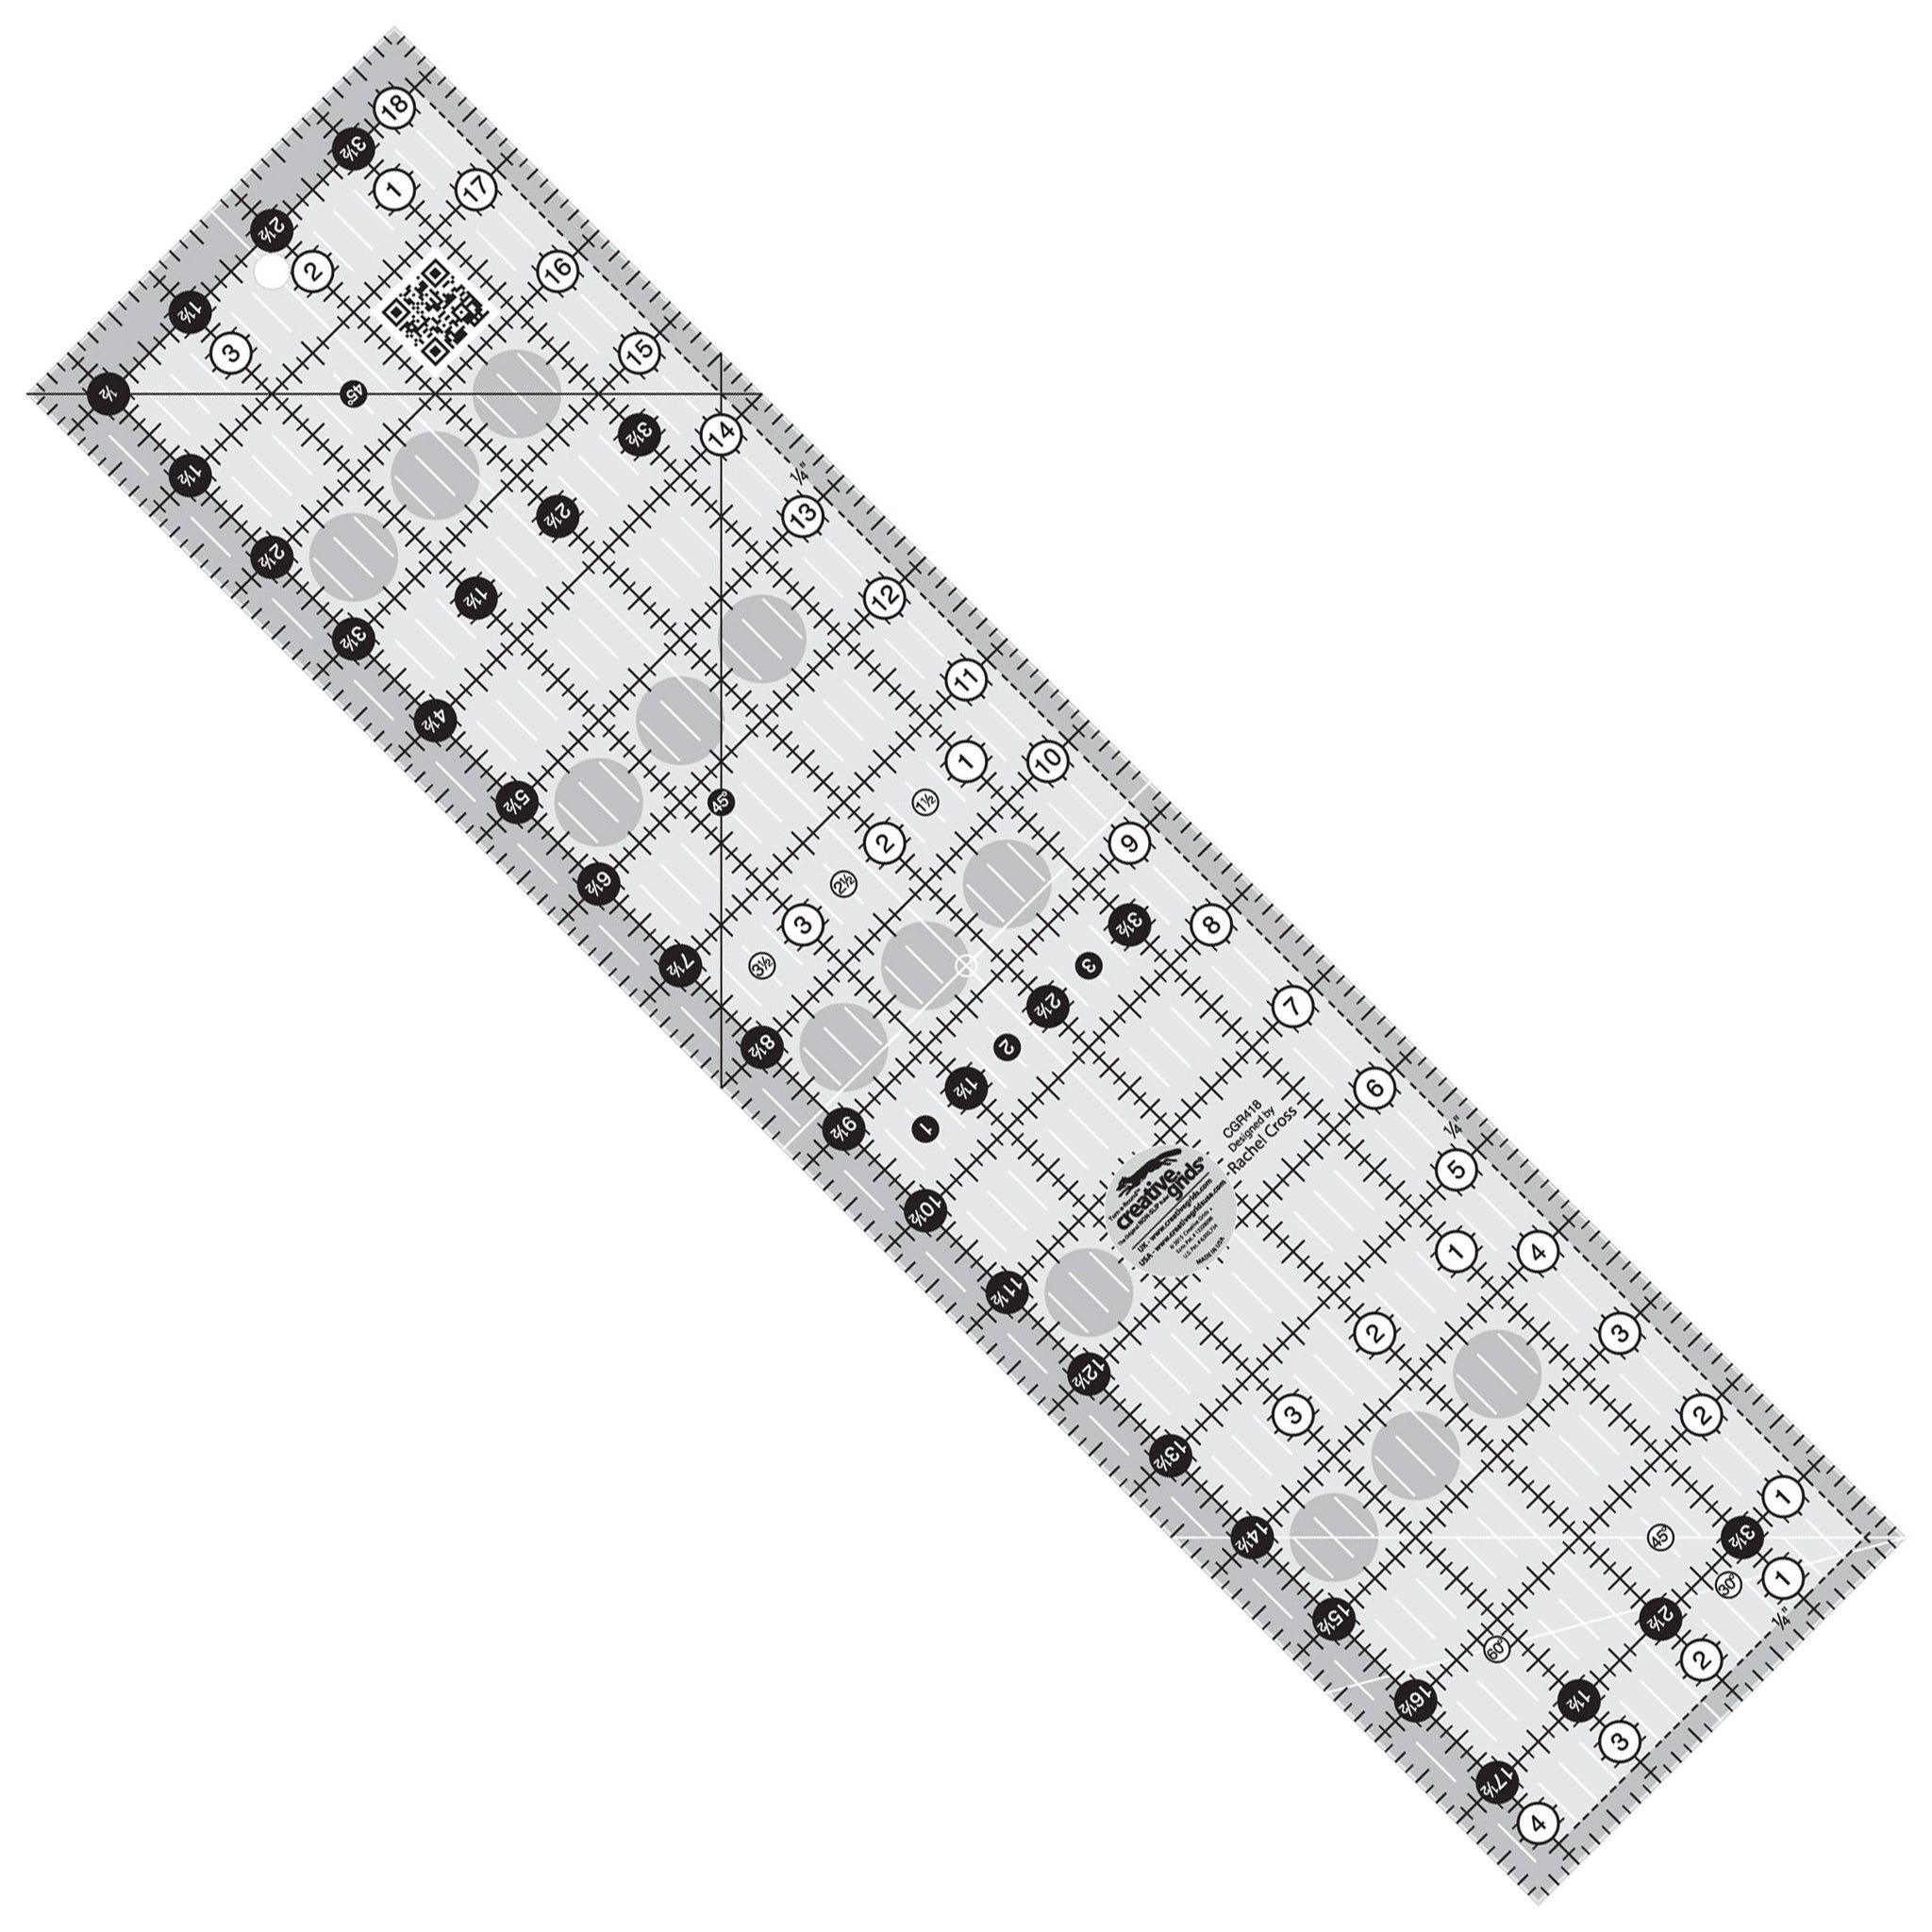 Creative Grids® Quilt Ruler 16 1/2 x 16 1/2 Square - for Creative